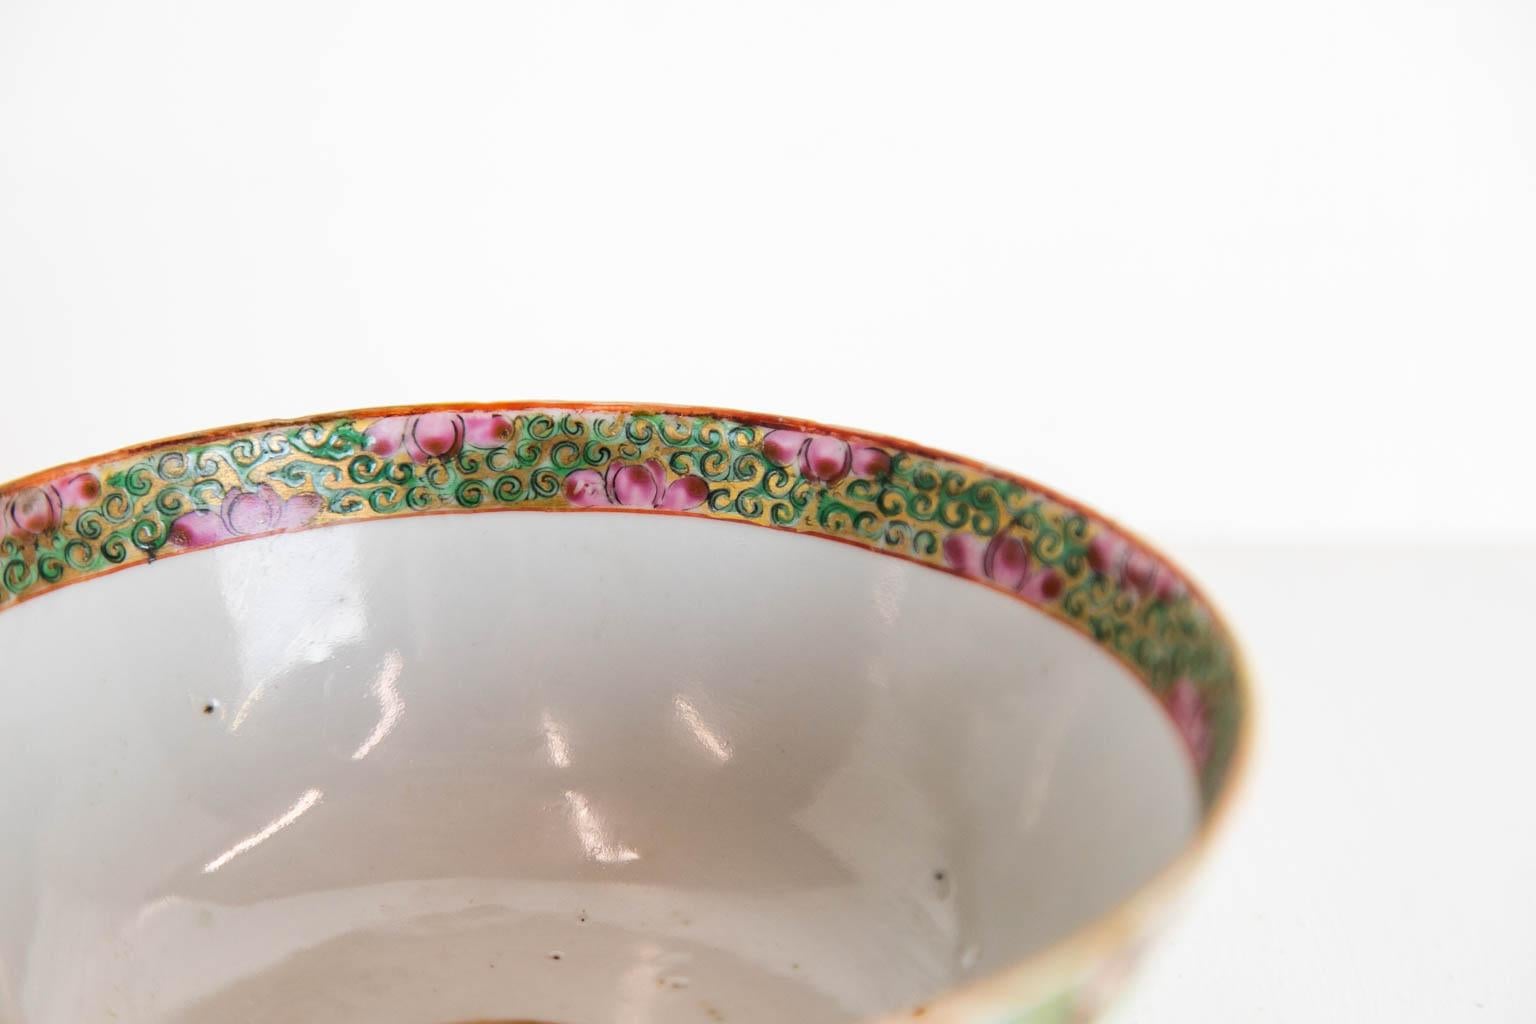 Mid-19th Century Rose Medallion Bowl For Sale